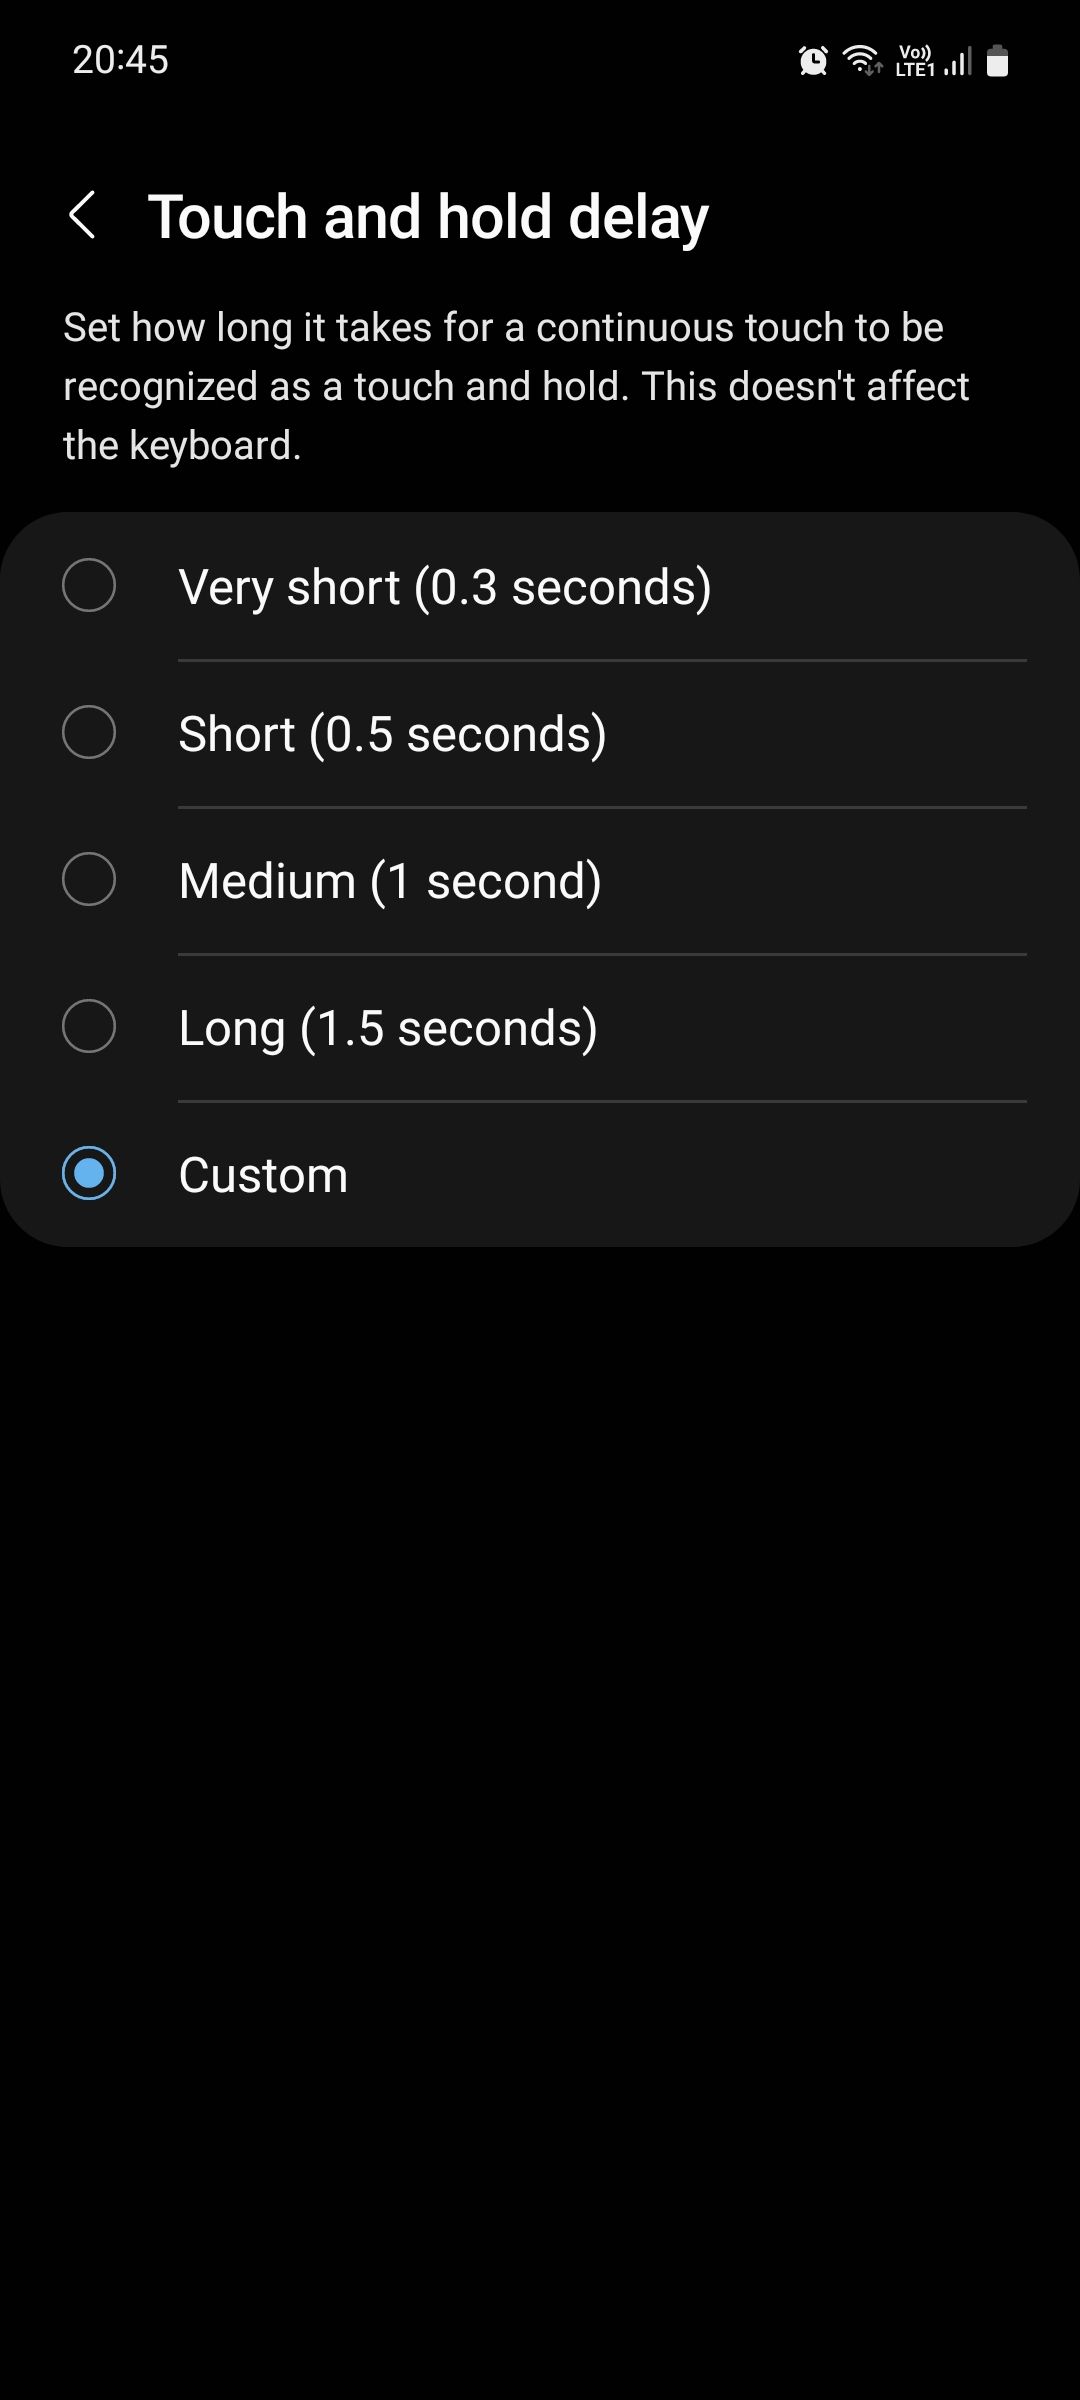 Samsung touch and hold delay menu